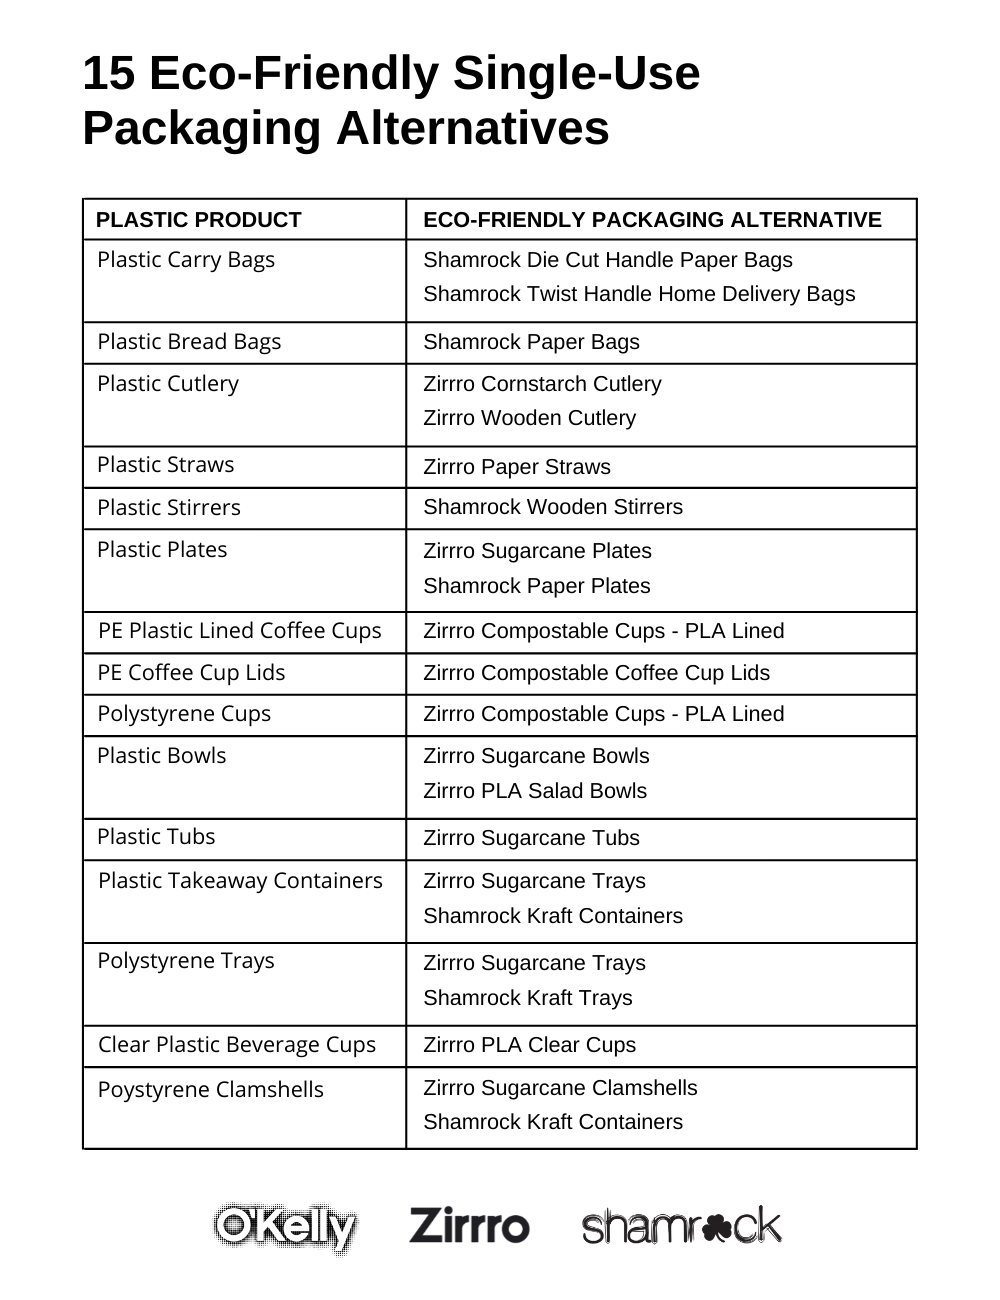 15 eco friendly packaging alternatives table.png